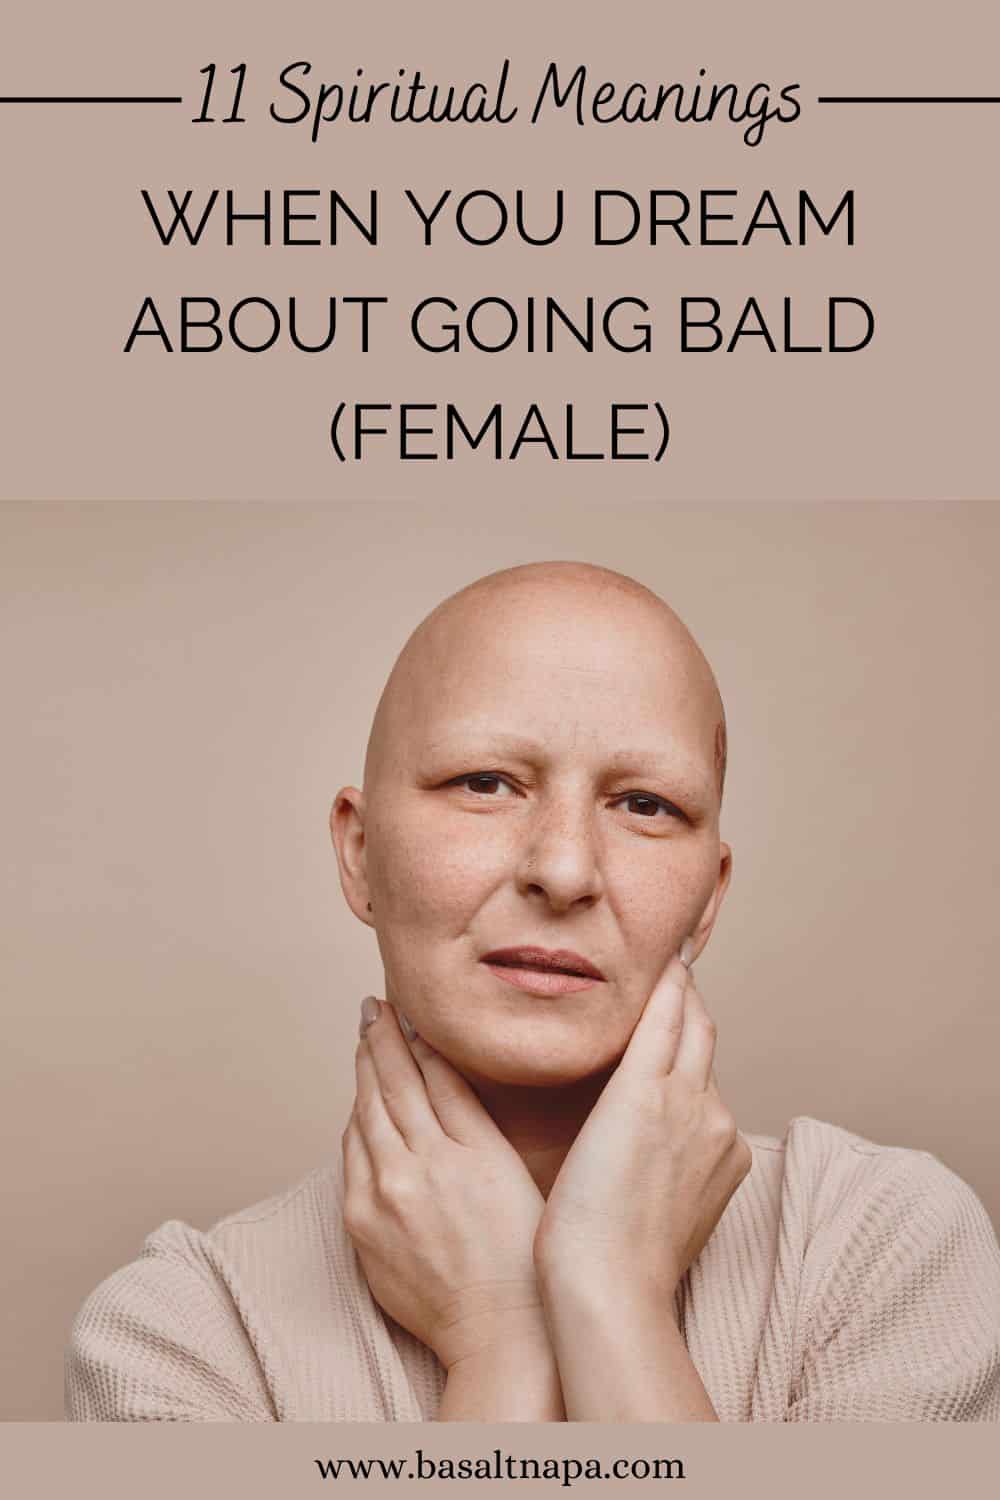 11 Spiritual Meanings When You Dream About Going Bald (Female)